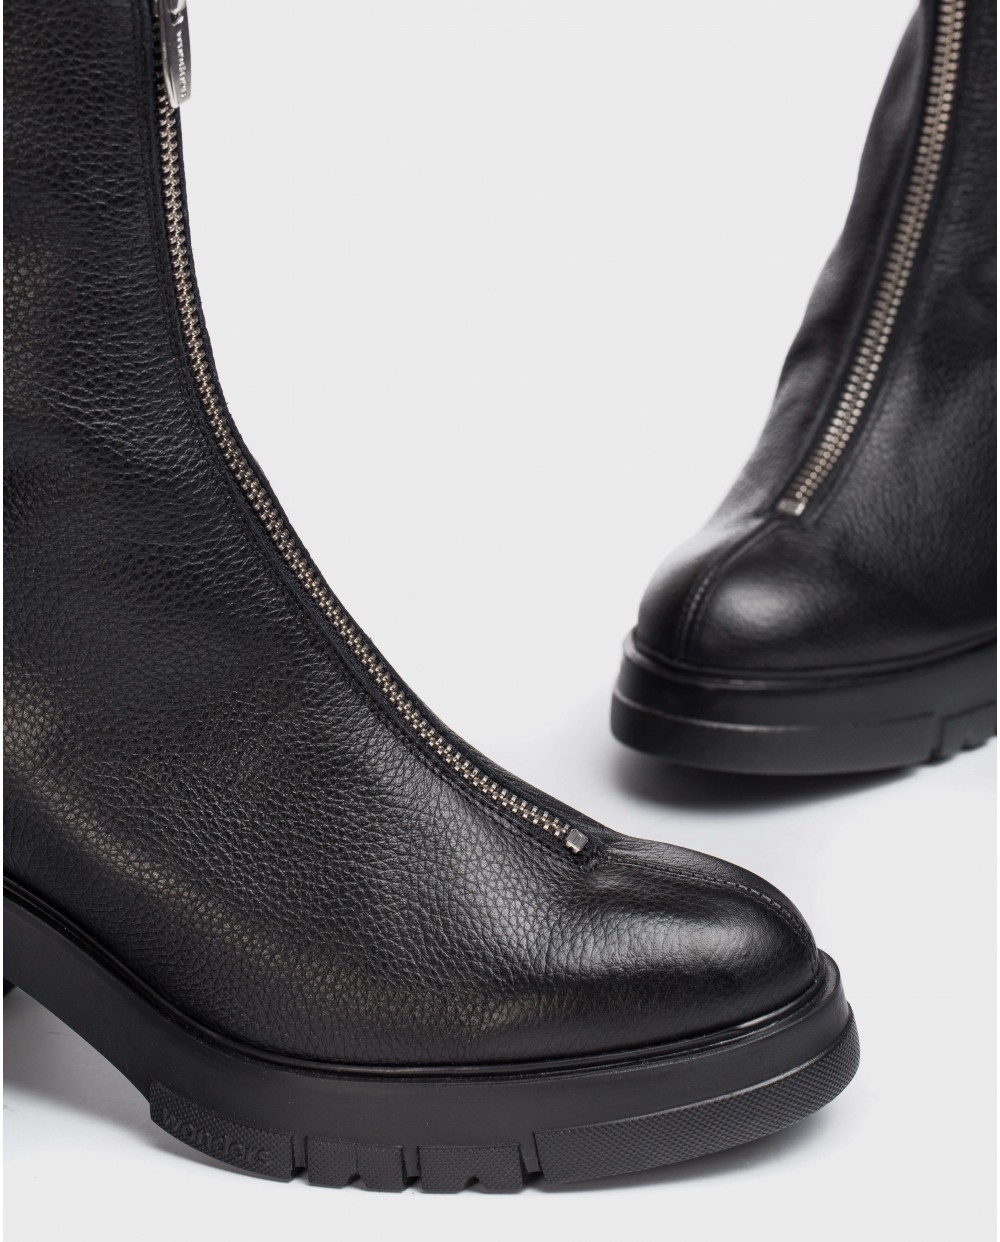 Wonders-Ankle Boots-Black Harley Ankle Boot